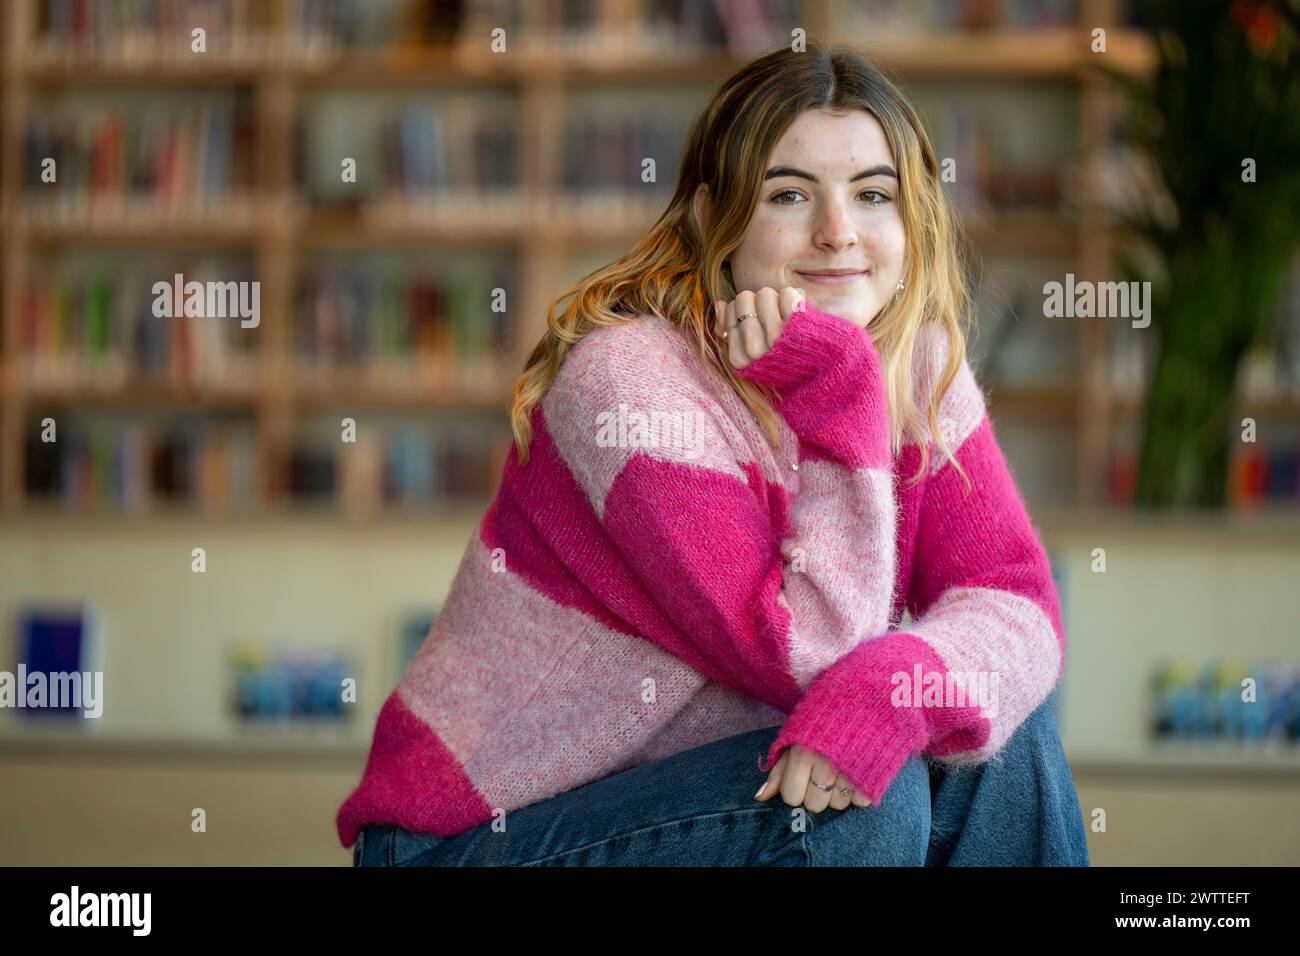 Young woman smiling in a library setting. Stock Photo